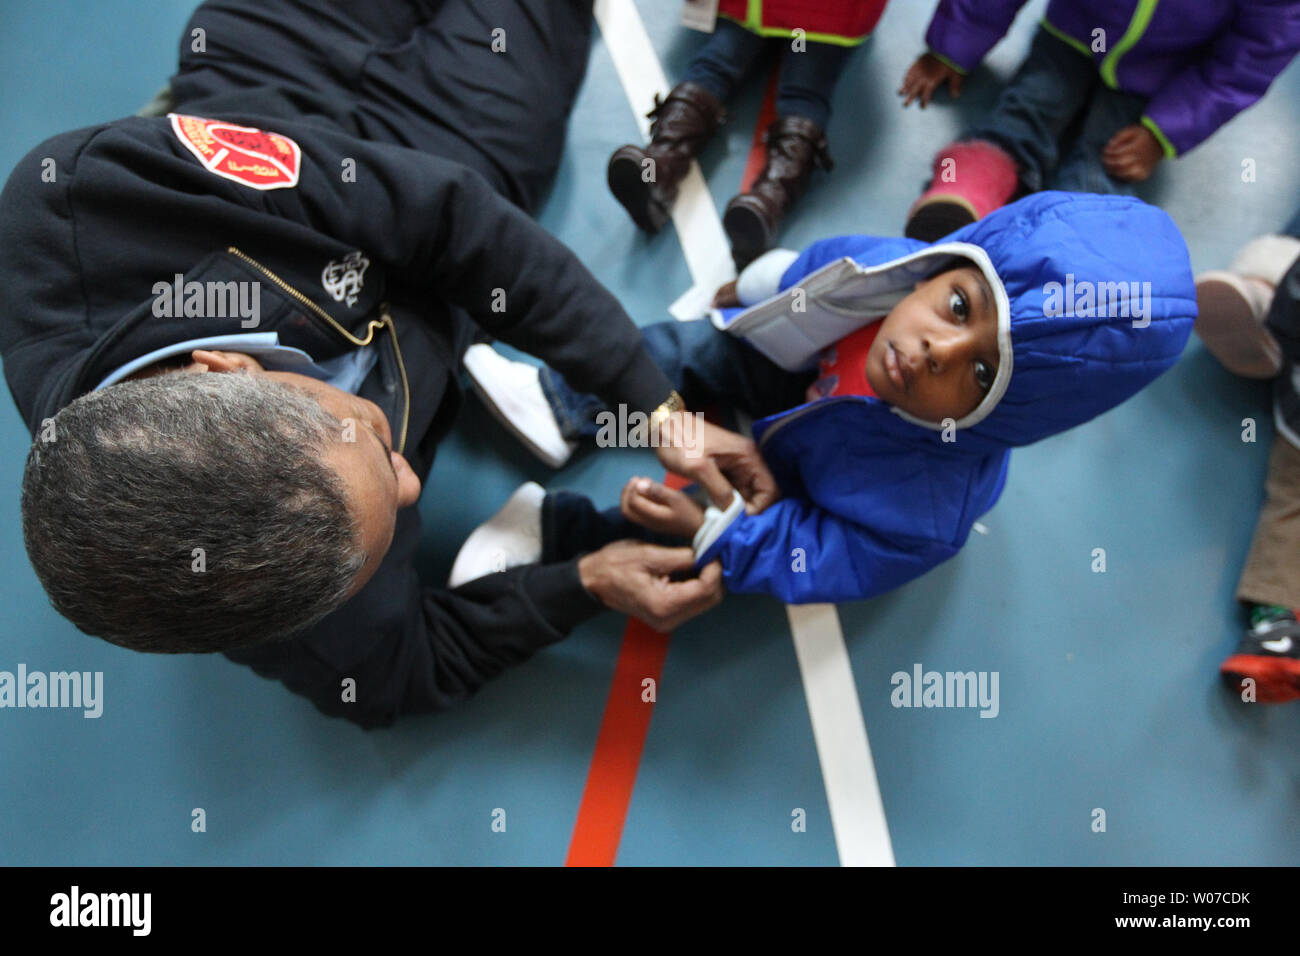 St. Louis Fire Department captain James Morgan helps Terrell McFee (2) with  the sleeves of his